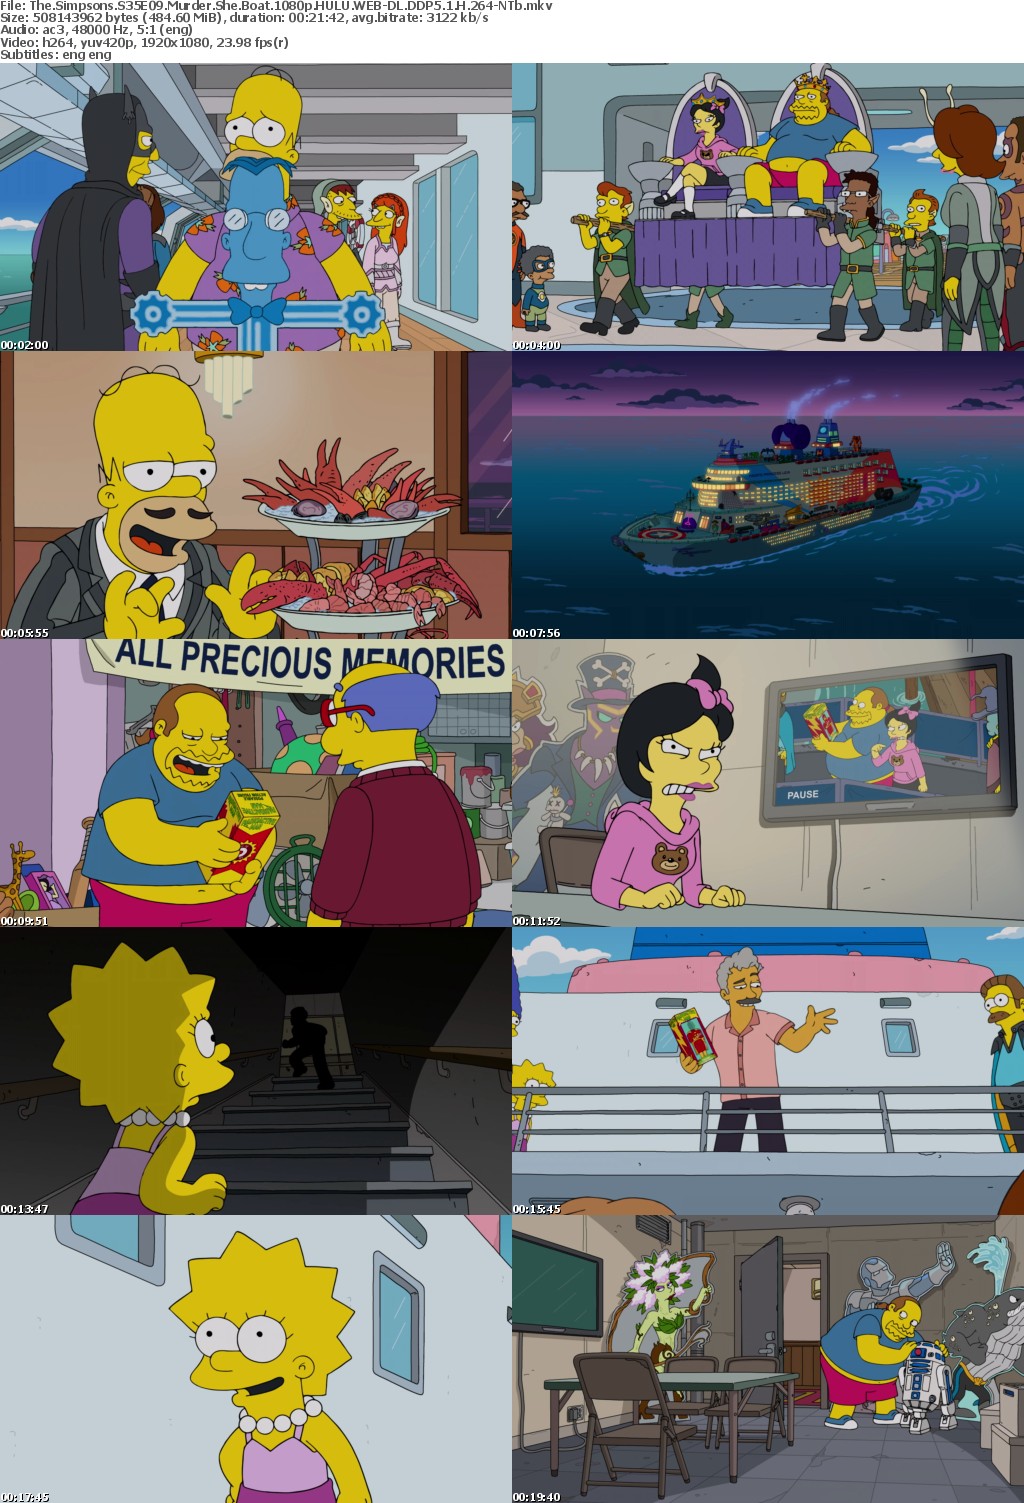 The Simpsons S35E09 Murder She Boat 1080p HULU WEB-DL DDP5 1 H 264-NTb